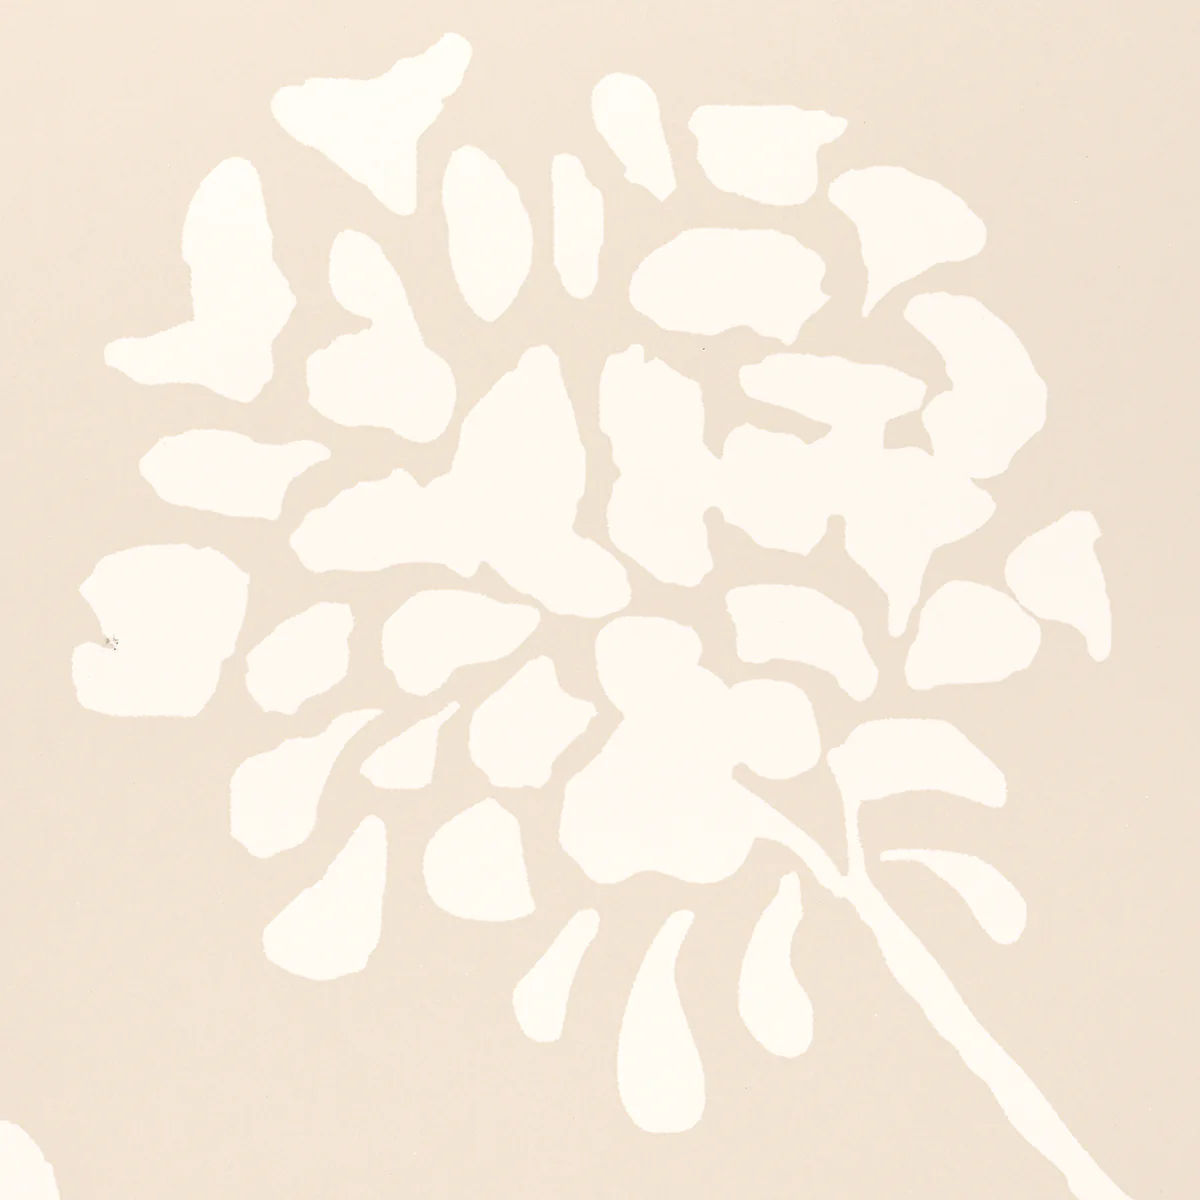 A white silhouette of a flower on a pale pink background - Neutral